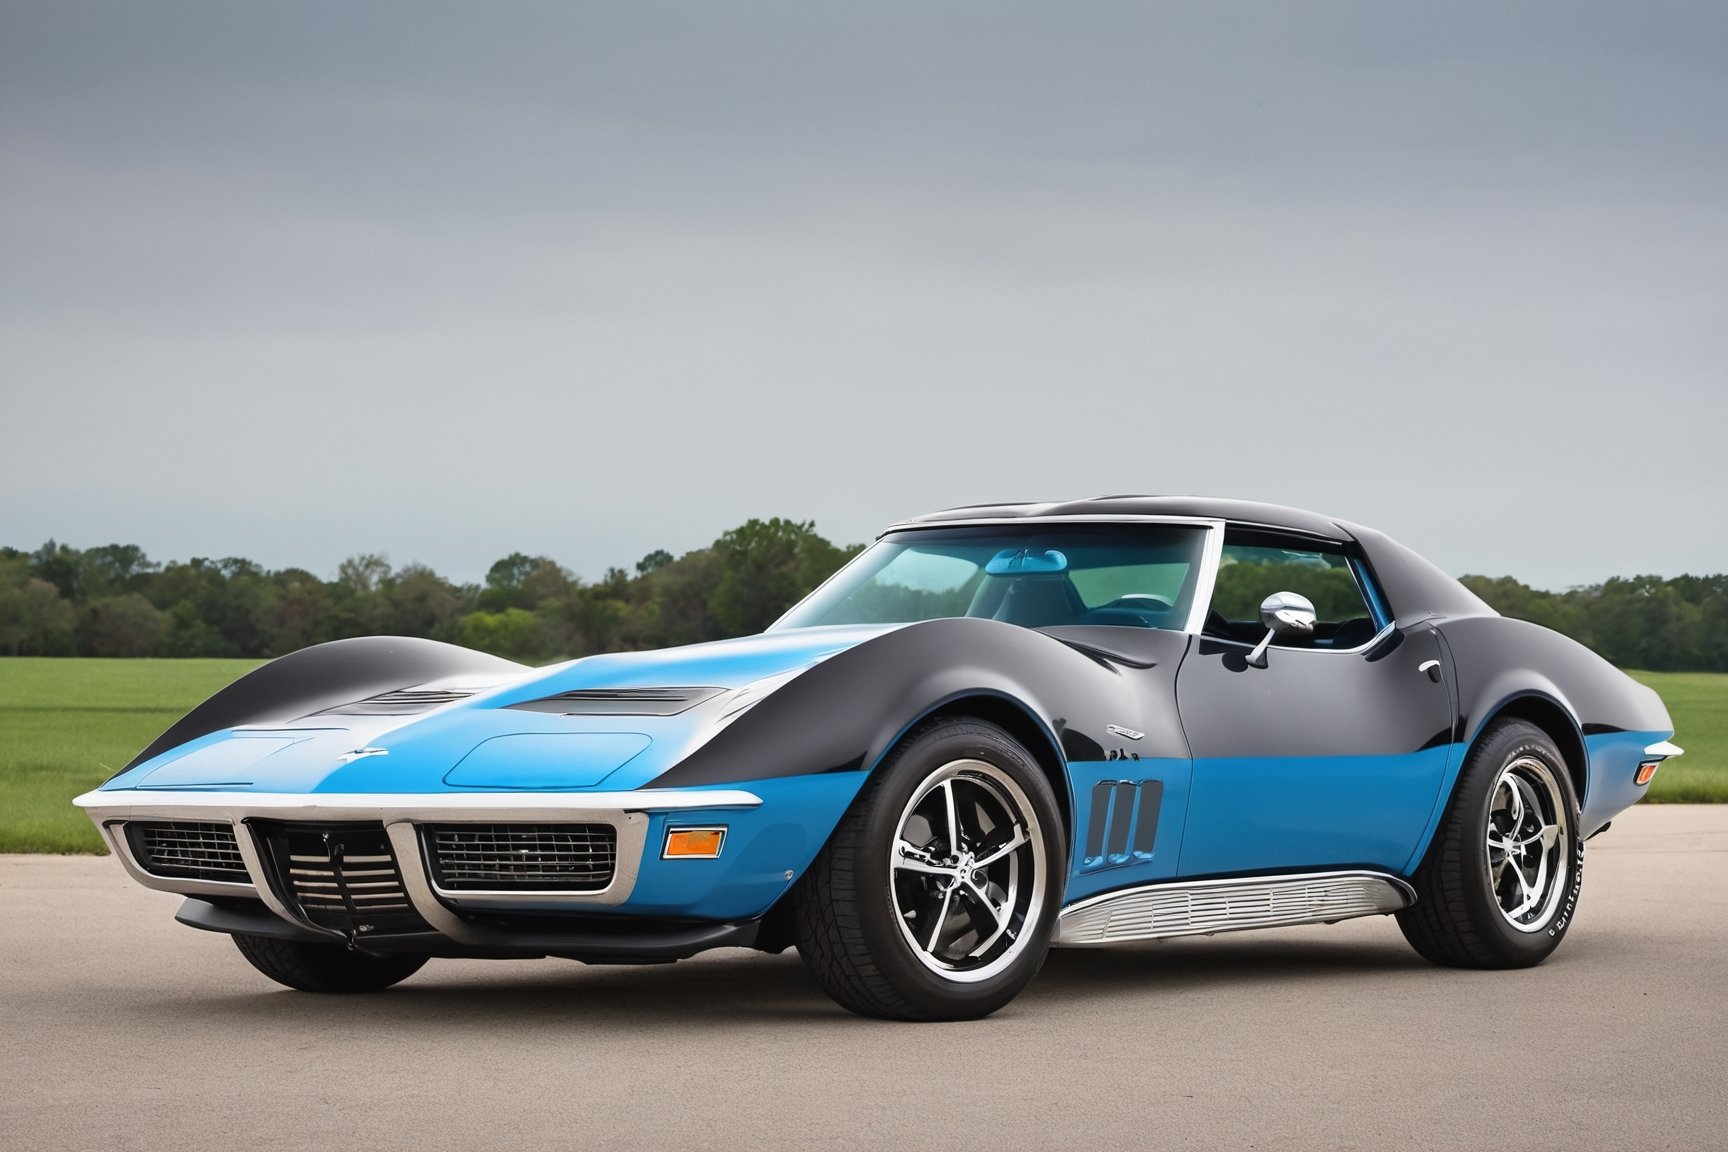 Photo of a Car, stingray, expensive, grey and blue theme, c 10.0, h 640, usa, ny, black wings instead of arms